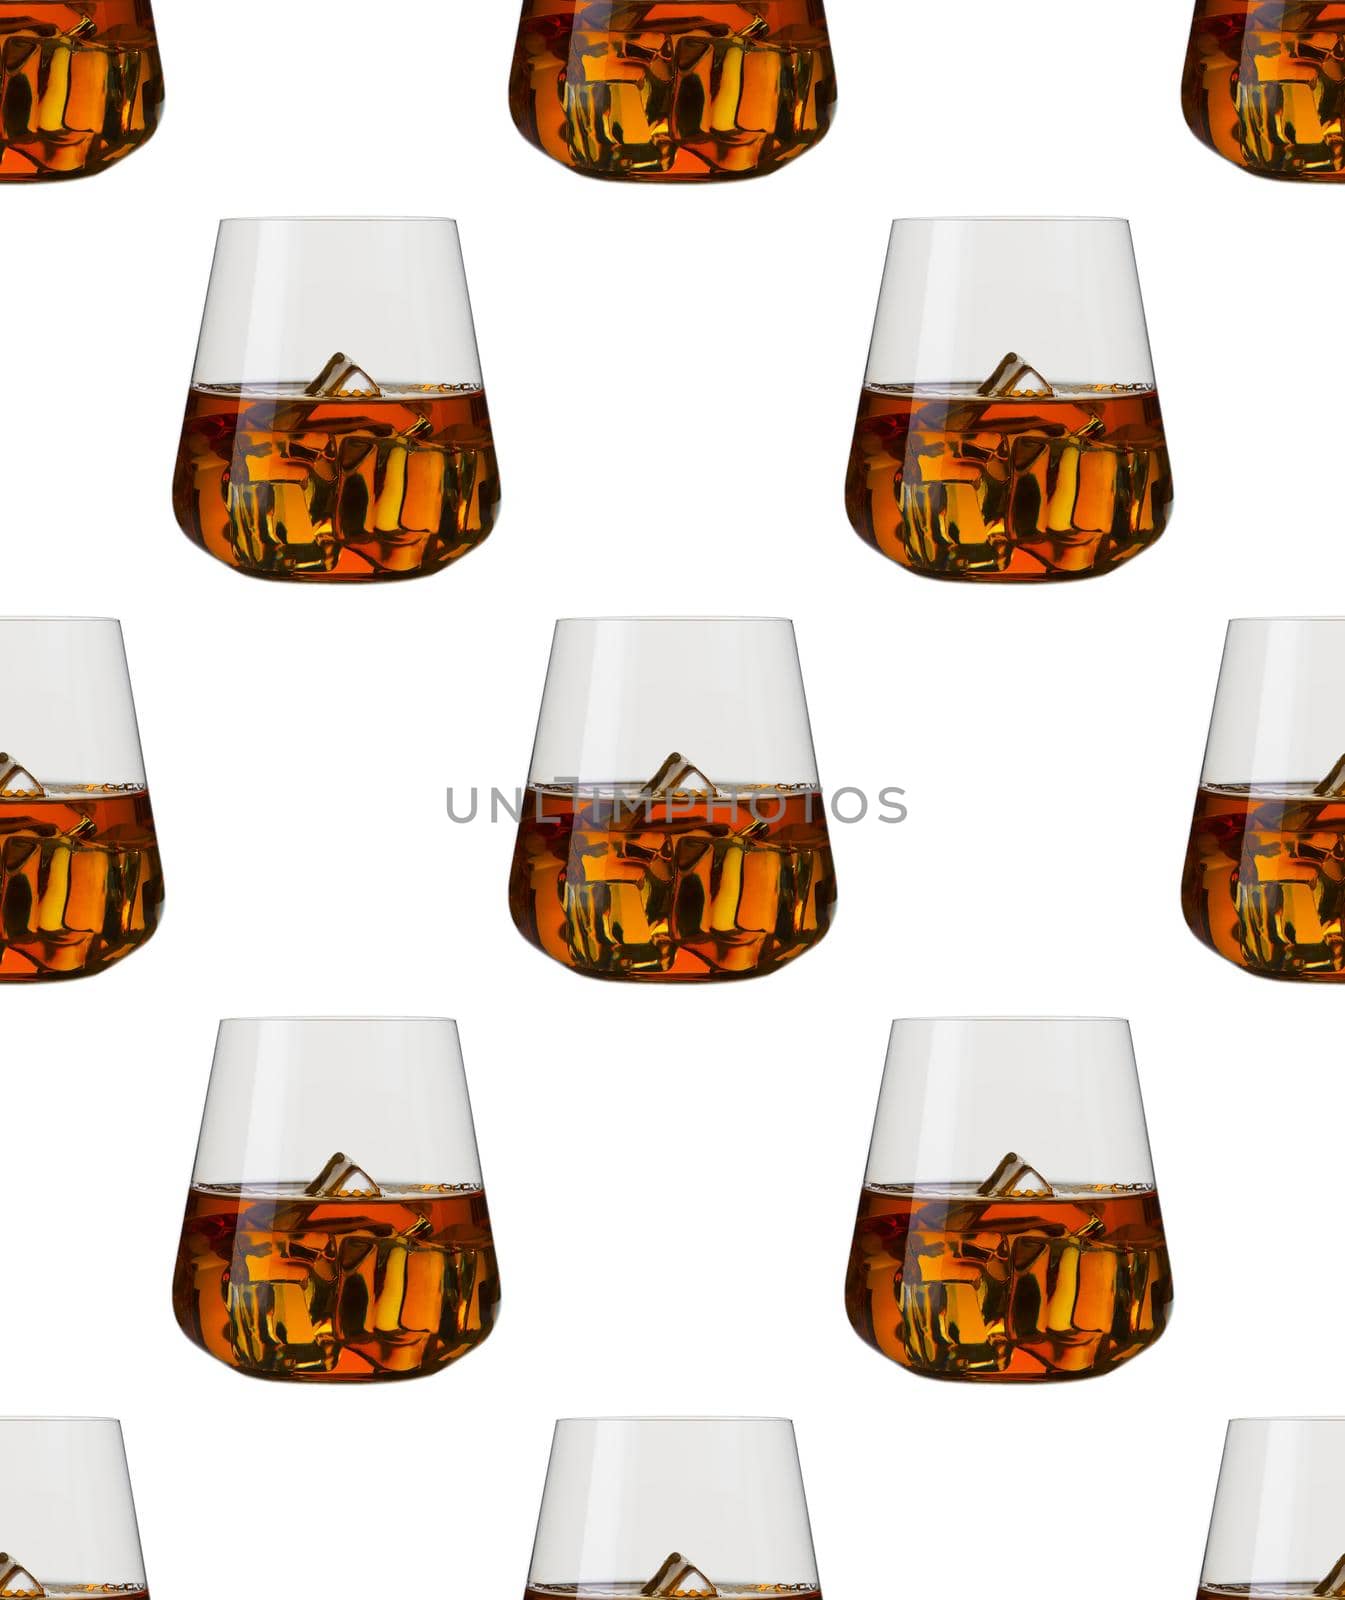 Seamless pattern - glasses of whisky over white background by PhotoTime